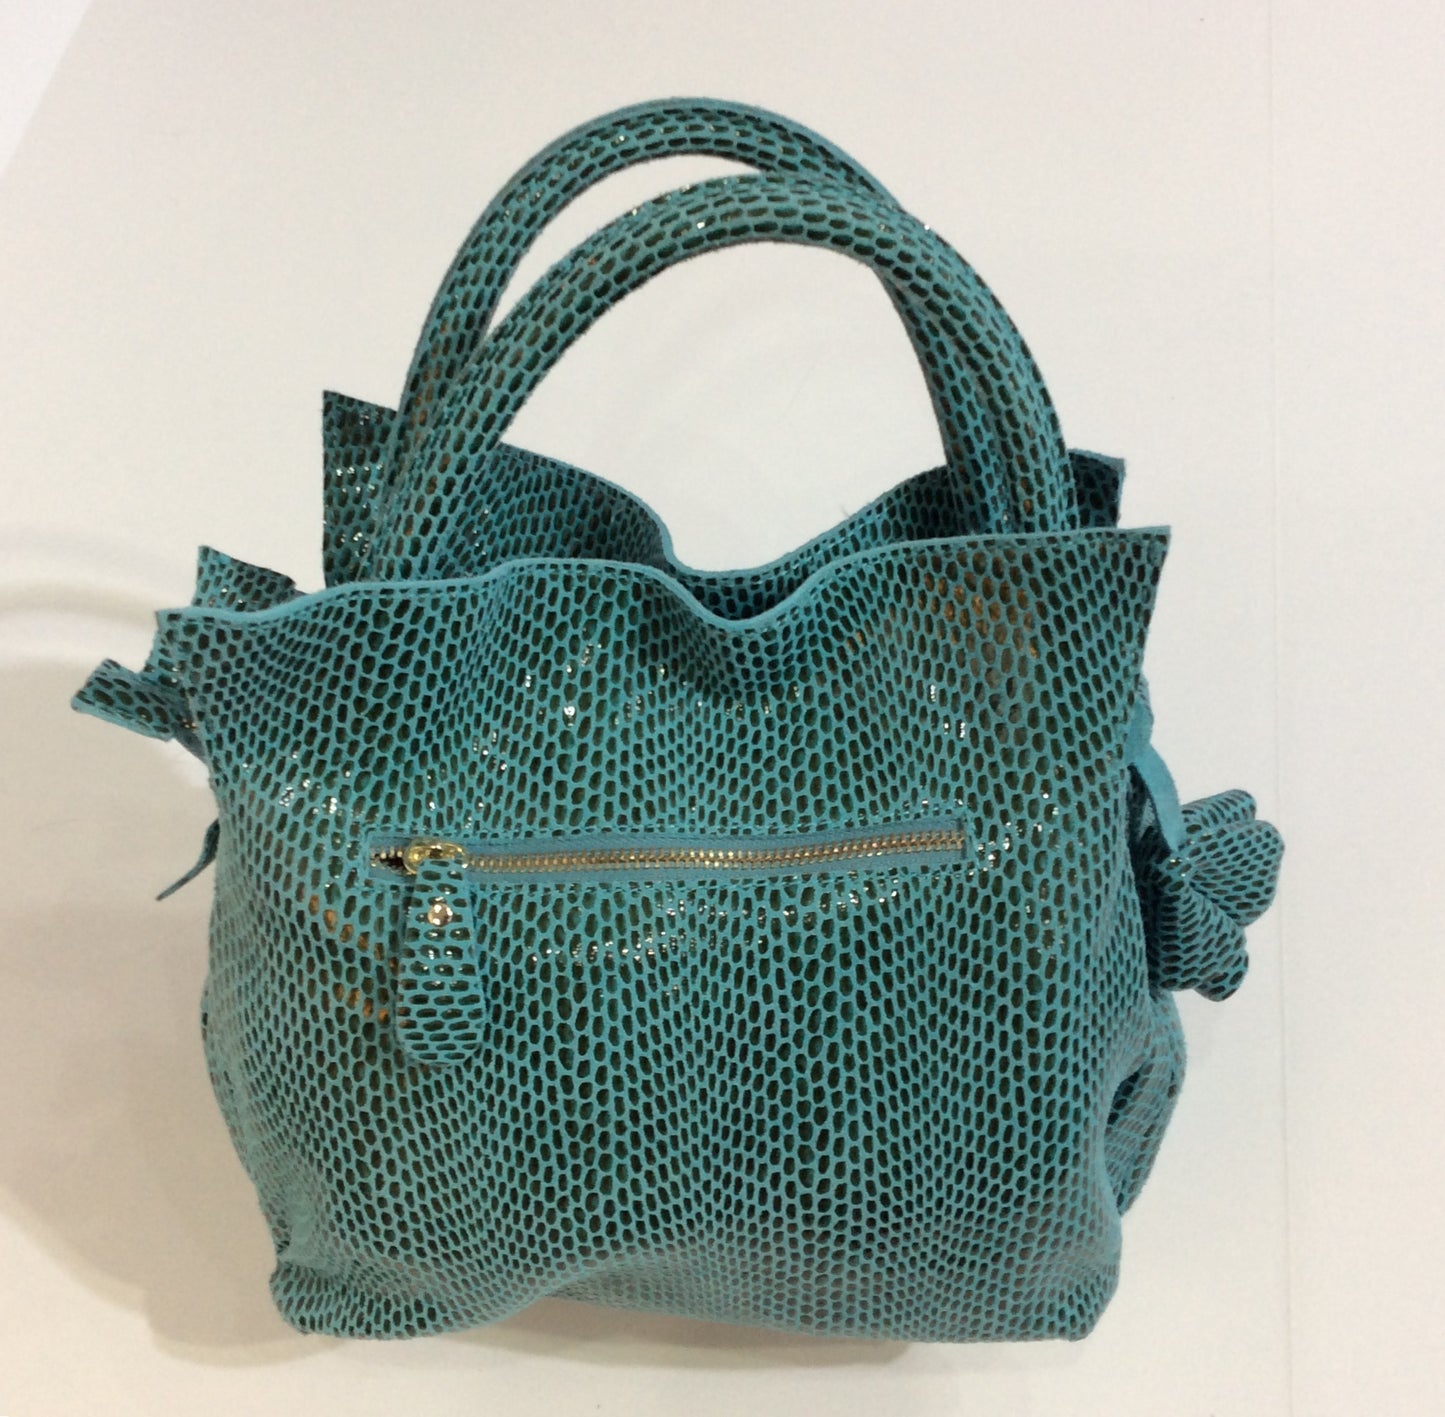 Embossed teal and grey Italian leather purse in faux reptile pattern